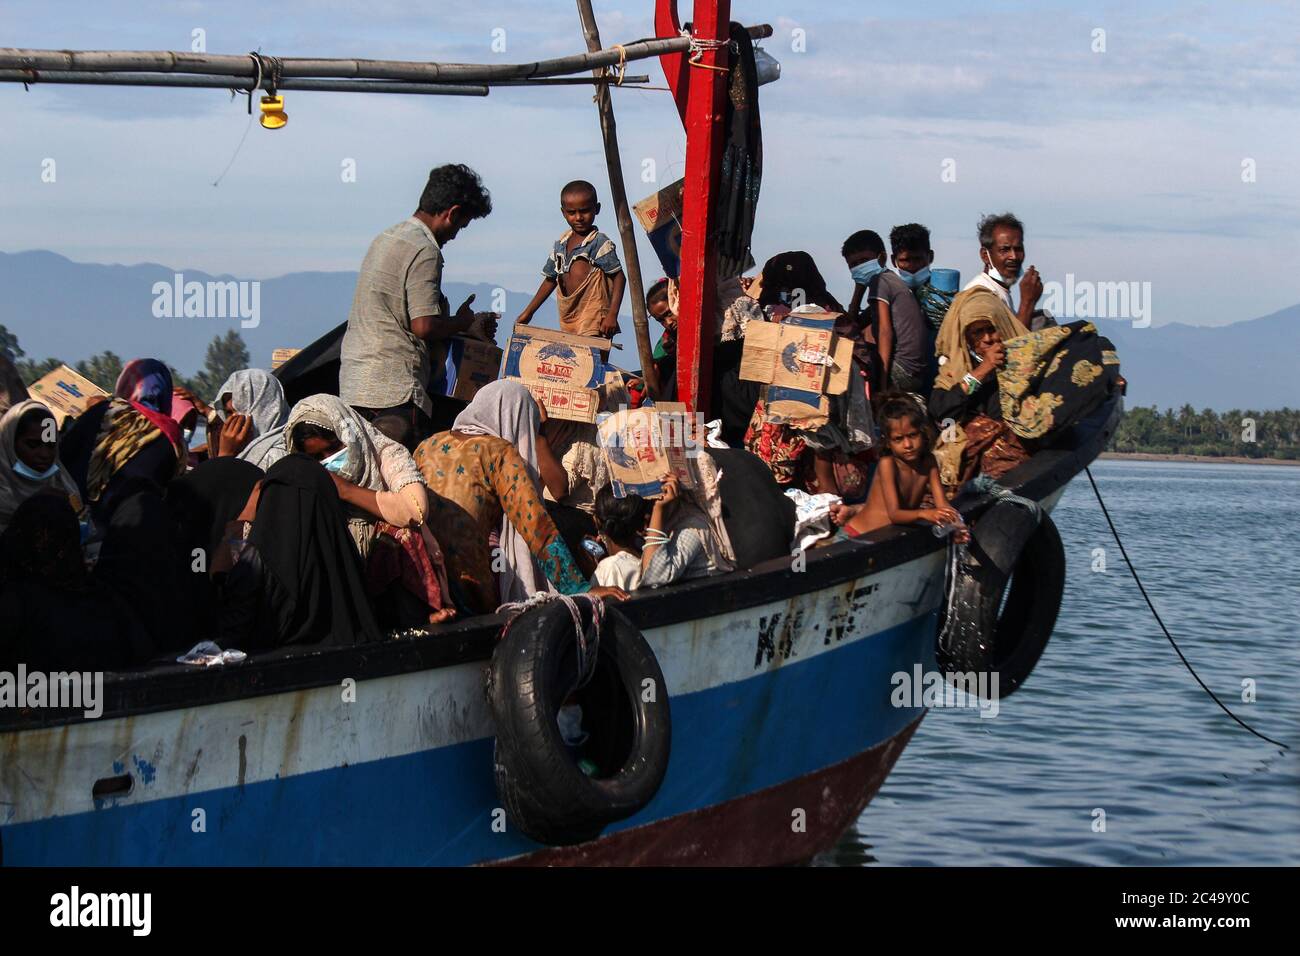 Aceh Utara, Indonesia. 25th June, 2020. A wooden boat seen 1 kilometre from the coast carrying dozens of Rohingya people.According to local officials, as many as 94 Rohingyas were found by Acehnese fishermen stranded in the middle of the sea waters 1 kilometre from the coast off Aceh Province using wooden boats. Credit: SOPA Images Limited/Alamy Live News Stock Photo